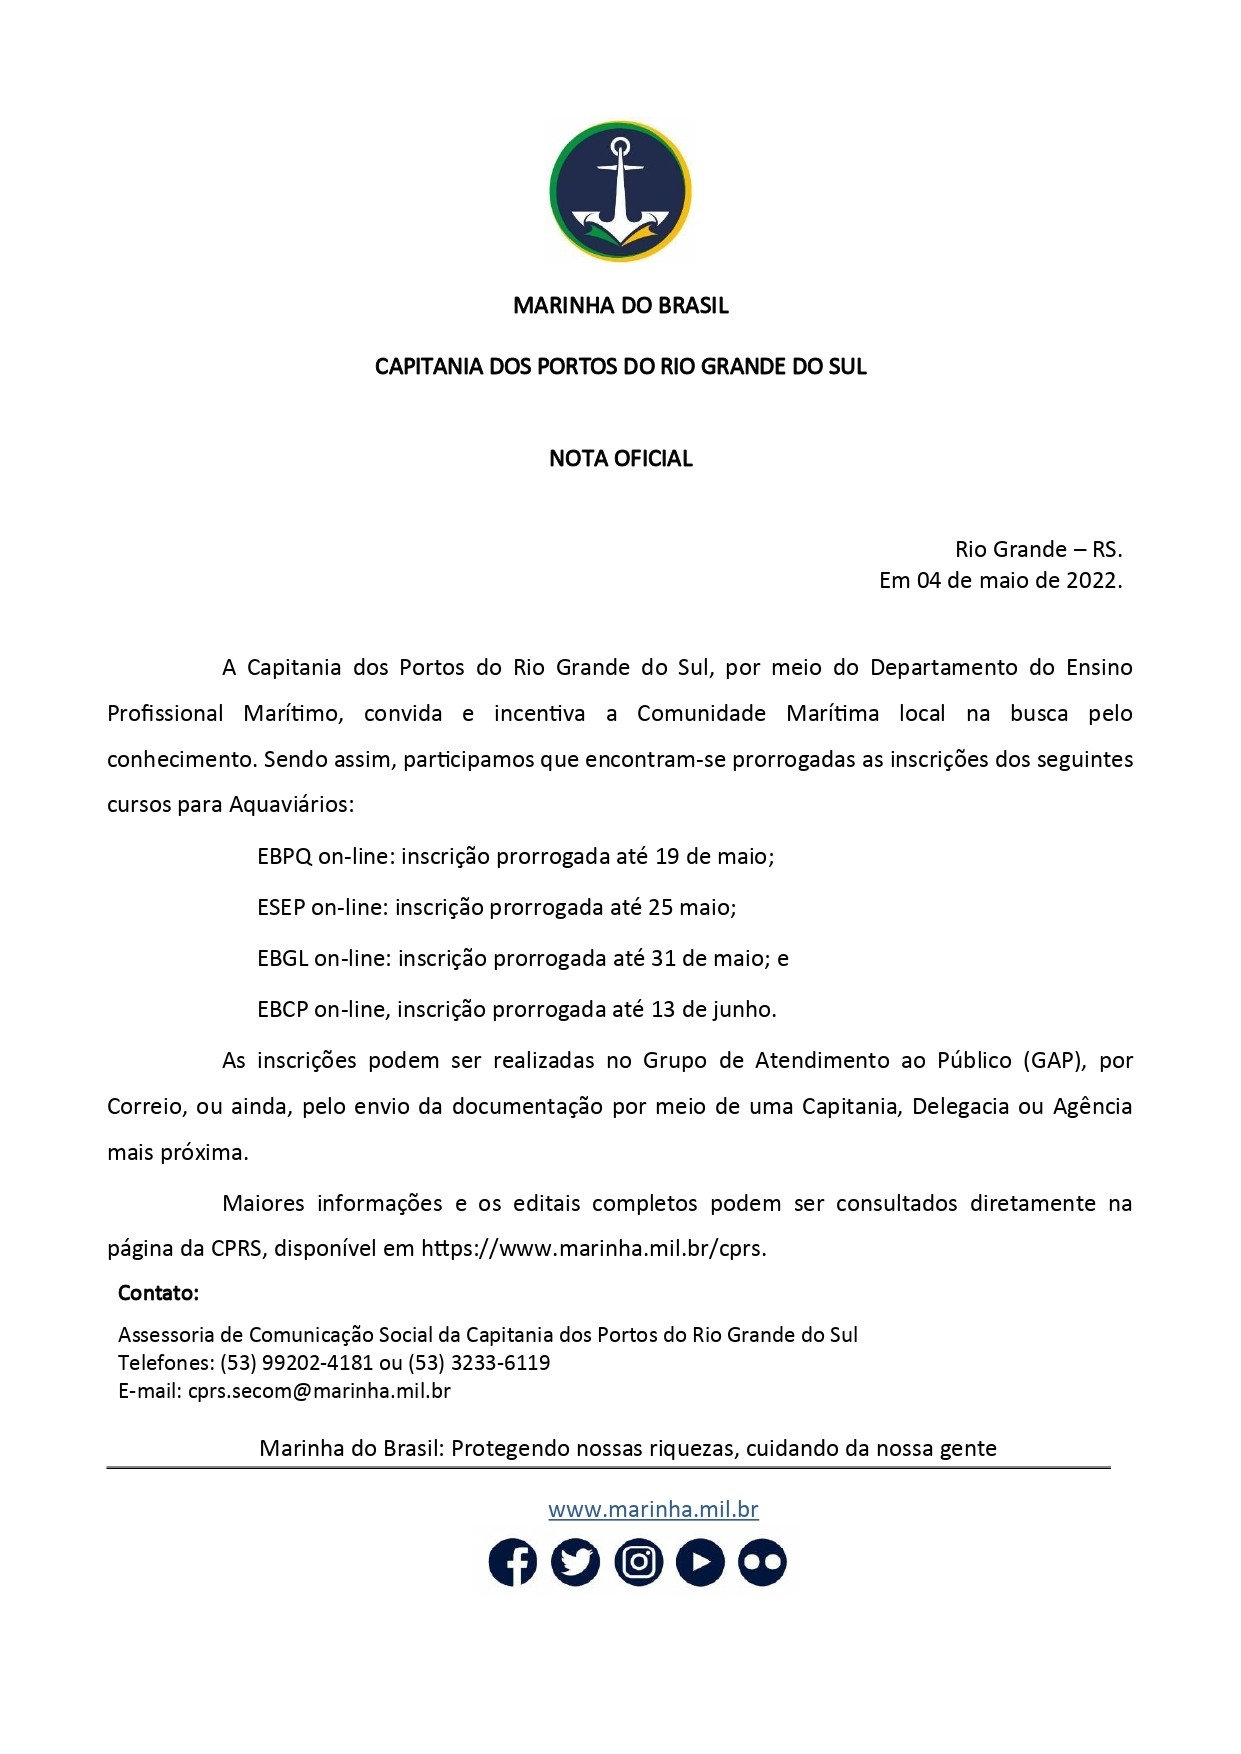 Nota oficial CPRS 04MAI2022_page-0001